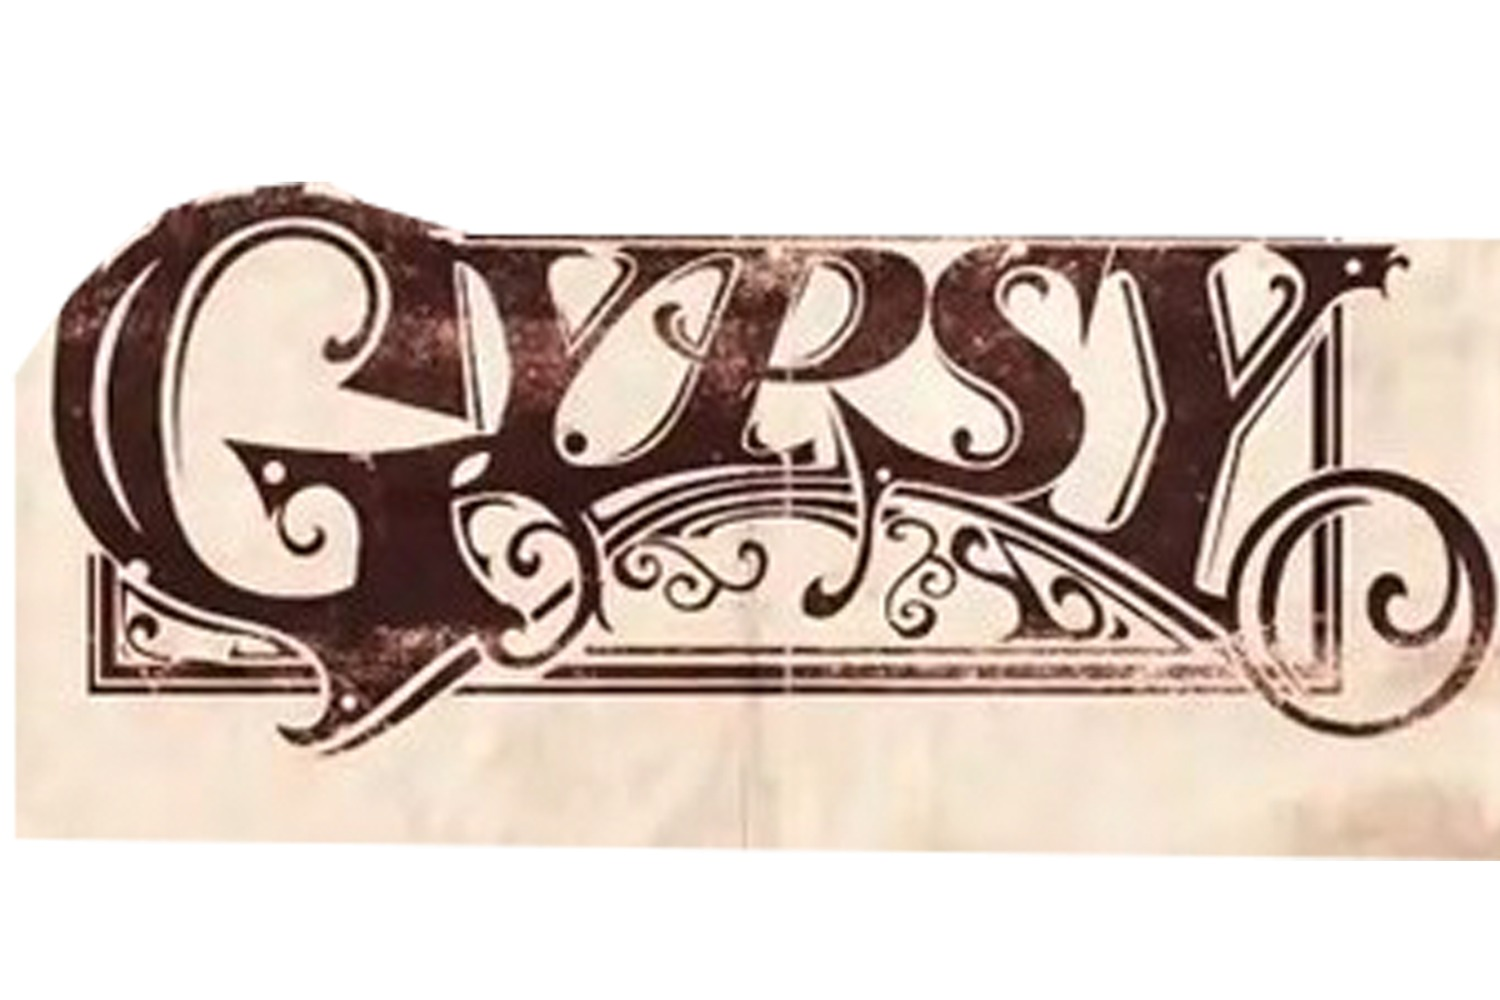 Gypsy Hand drawn font or Possible derivative from a few others?